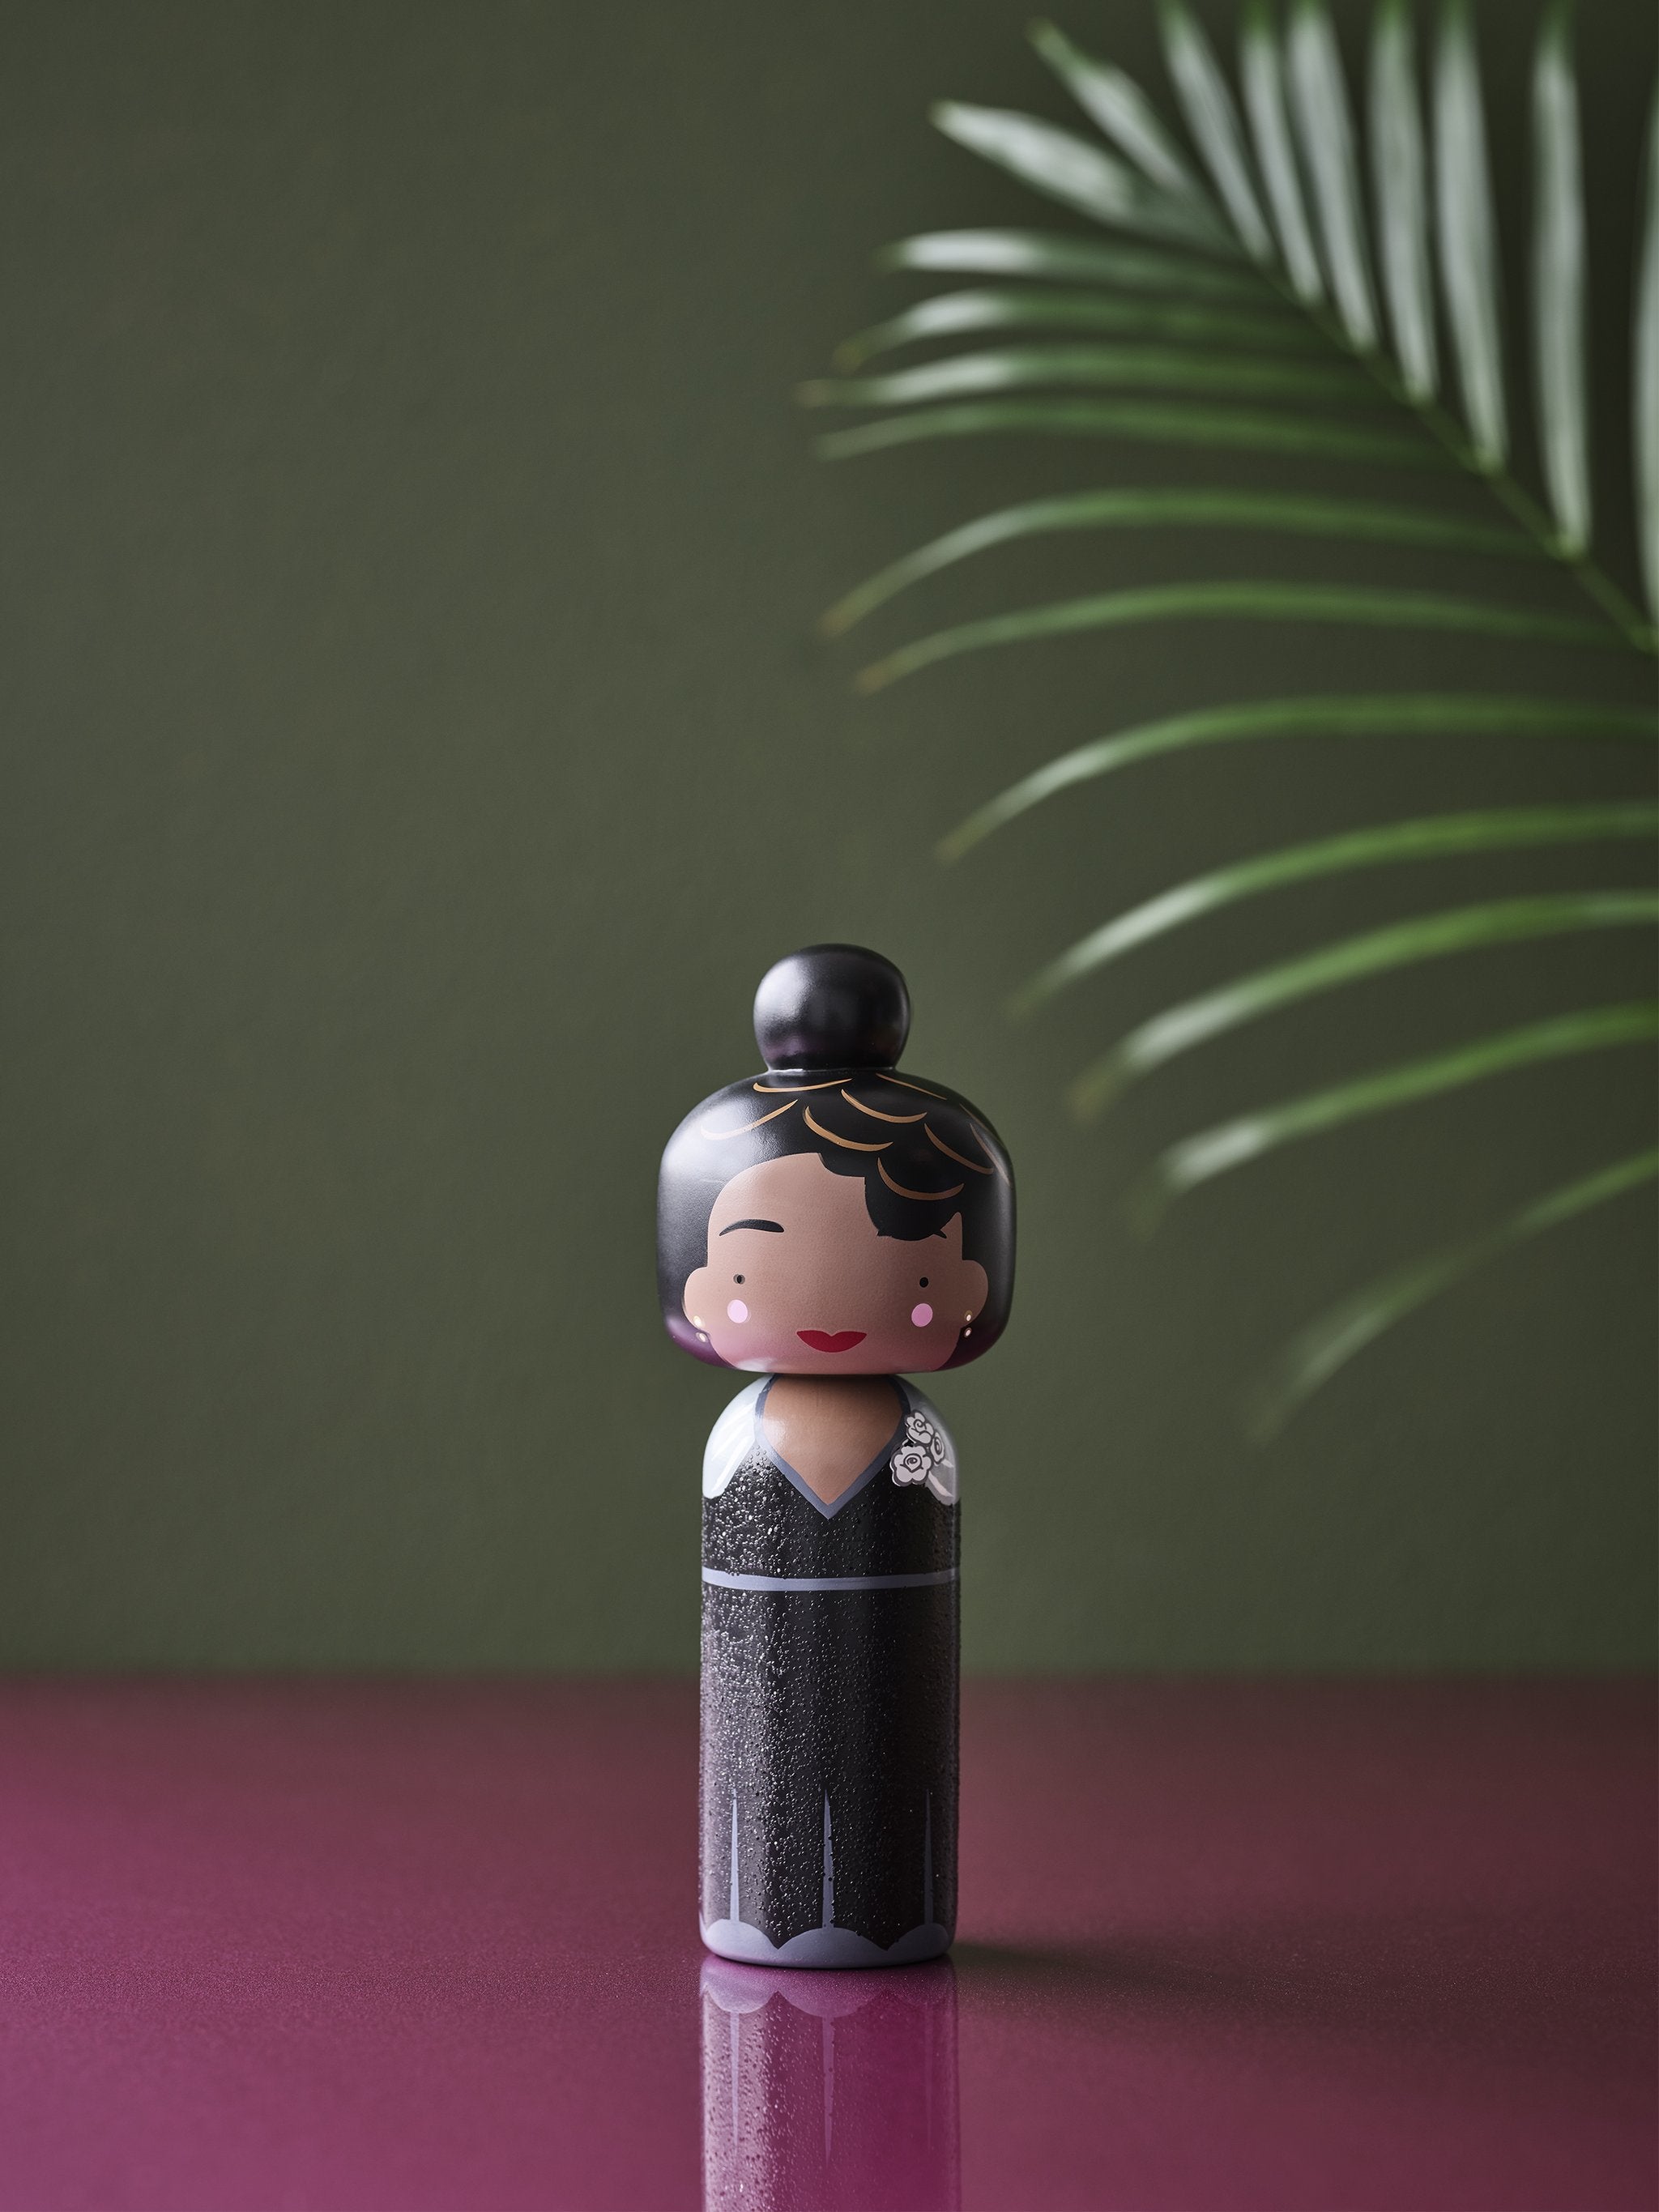 Kokeshi Doll by Sketch.Inc for Lucie Kaas - ELLA FITZGERALD,